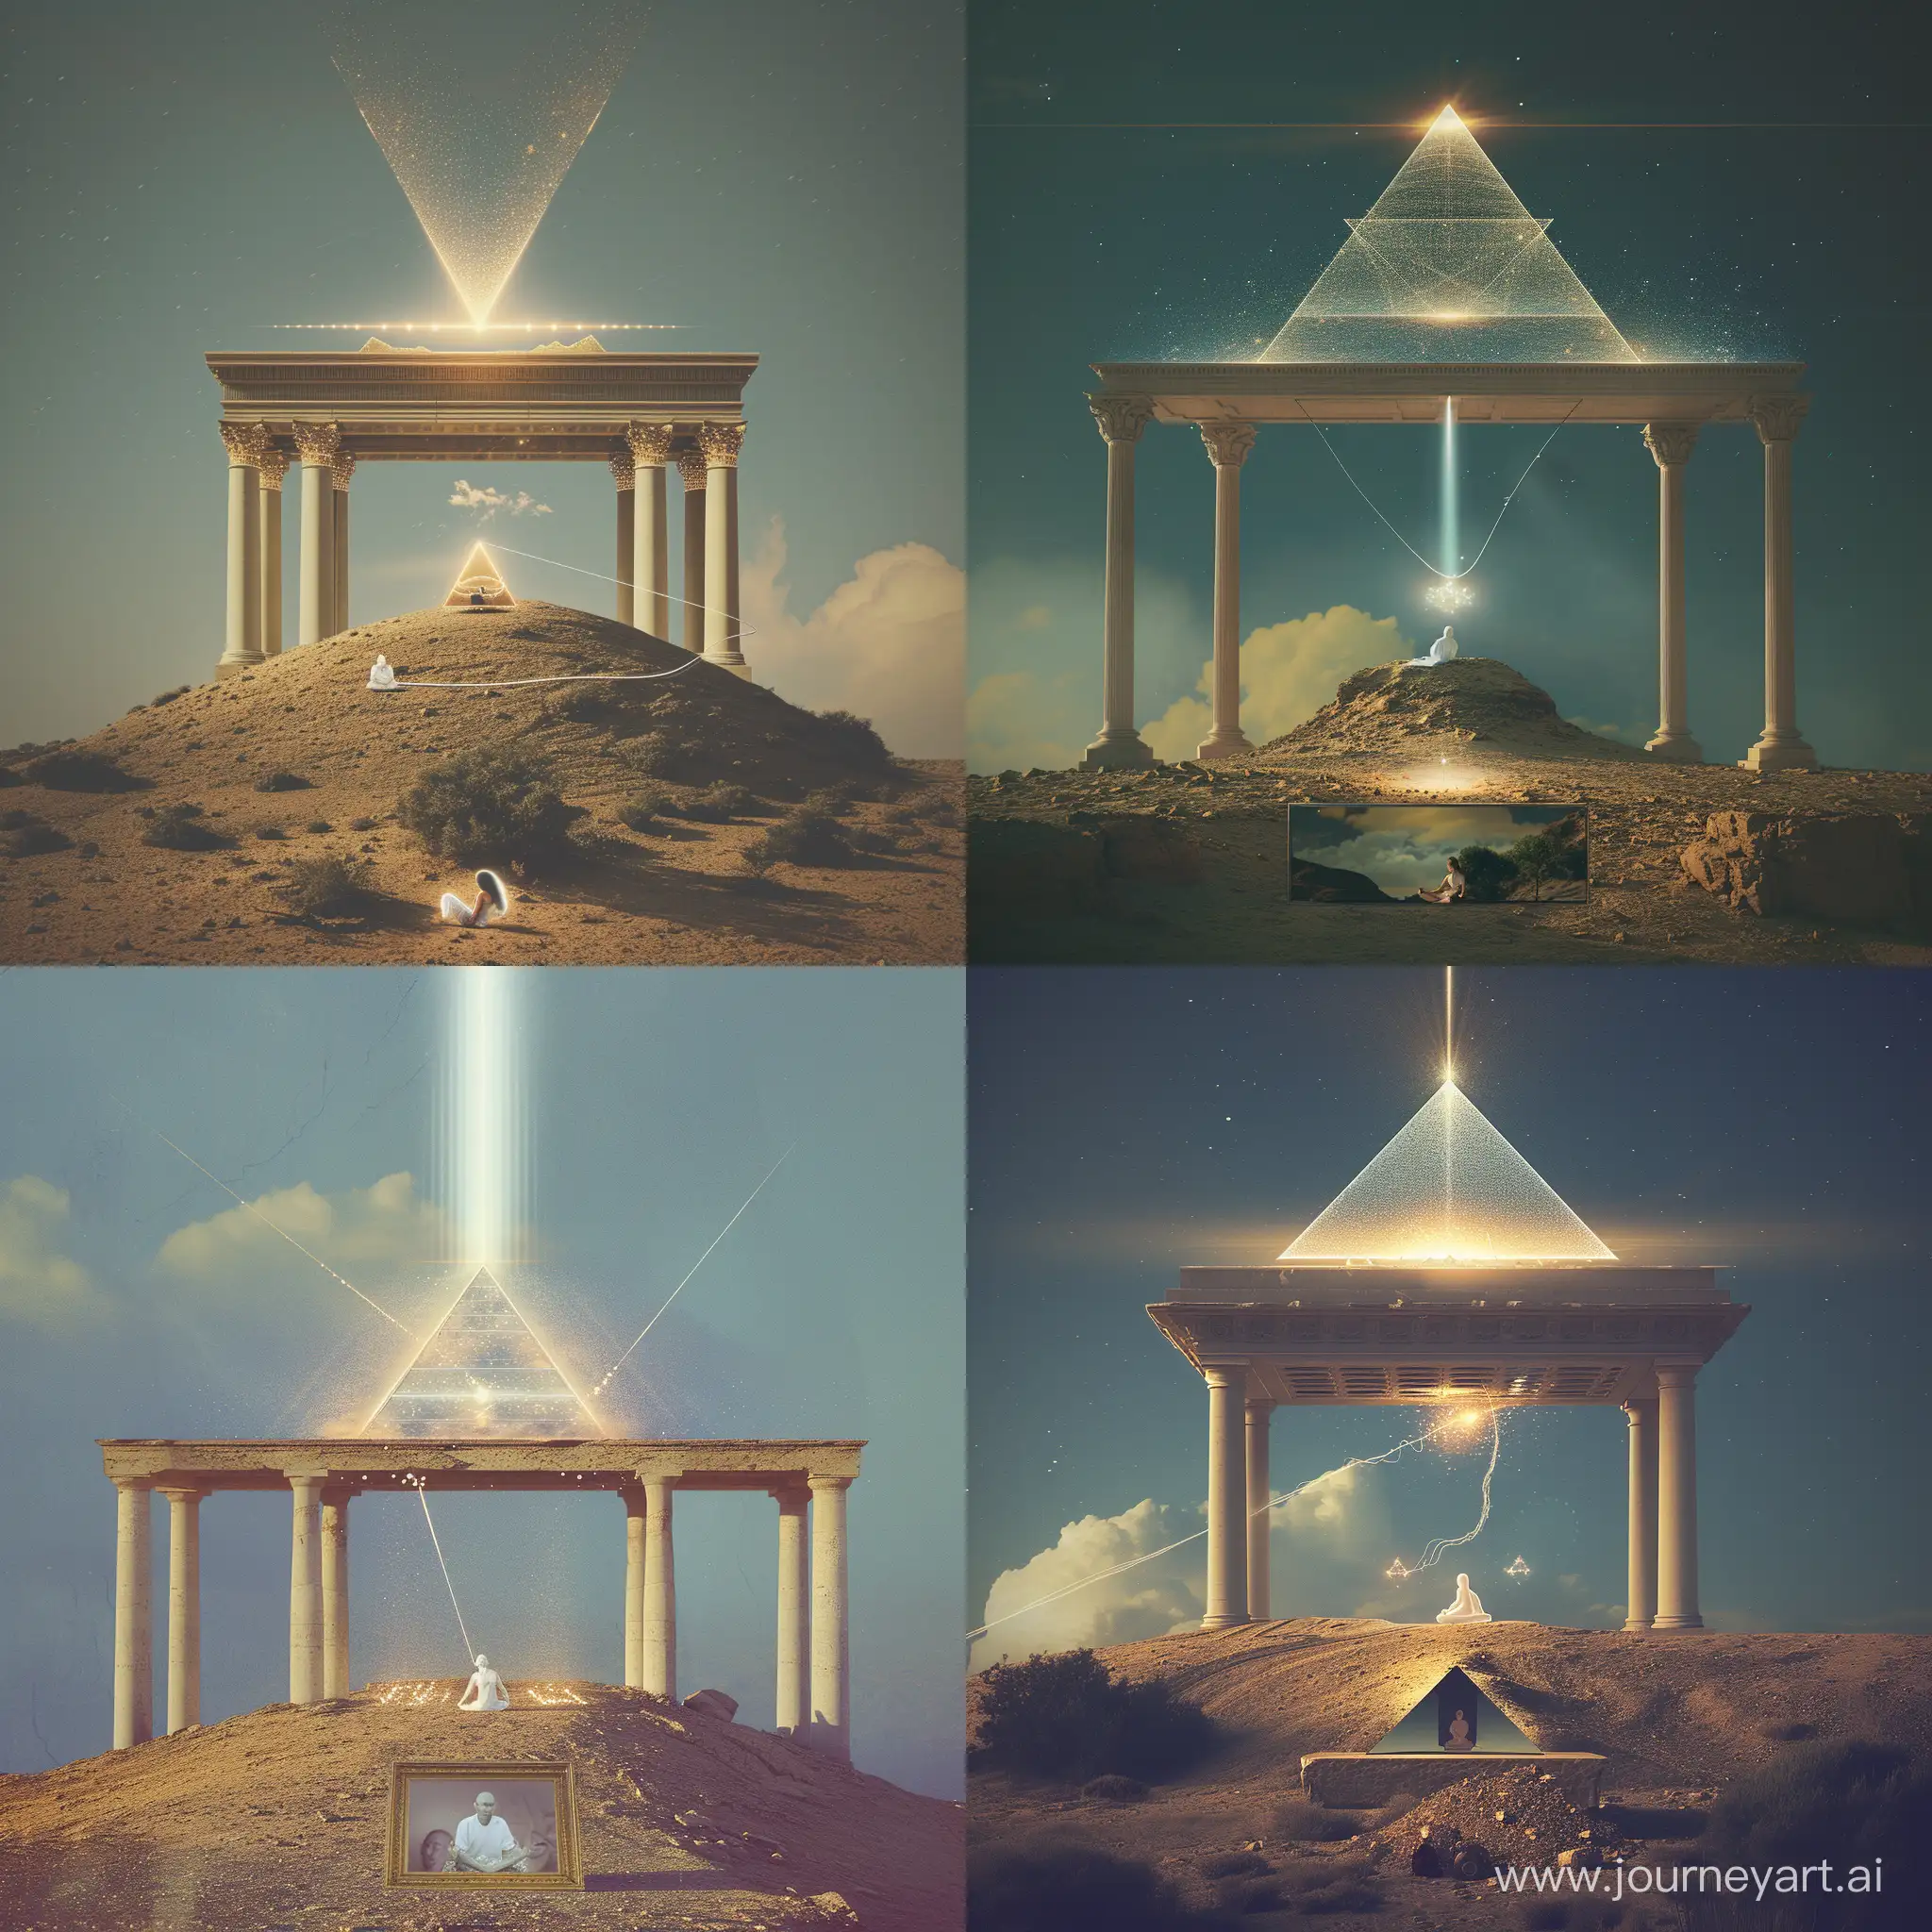 Mystical-Meditation-Person-in-White-Meditating-by-Pyramid-Structure